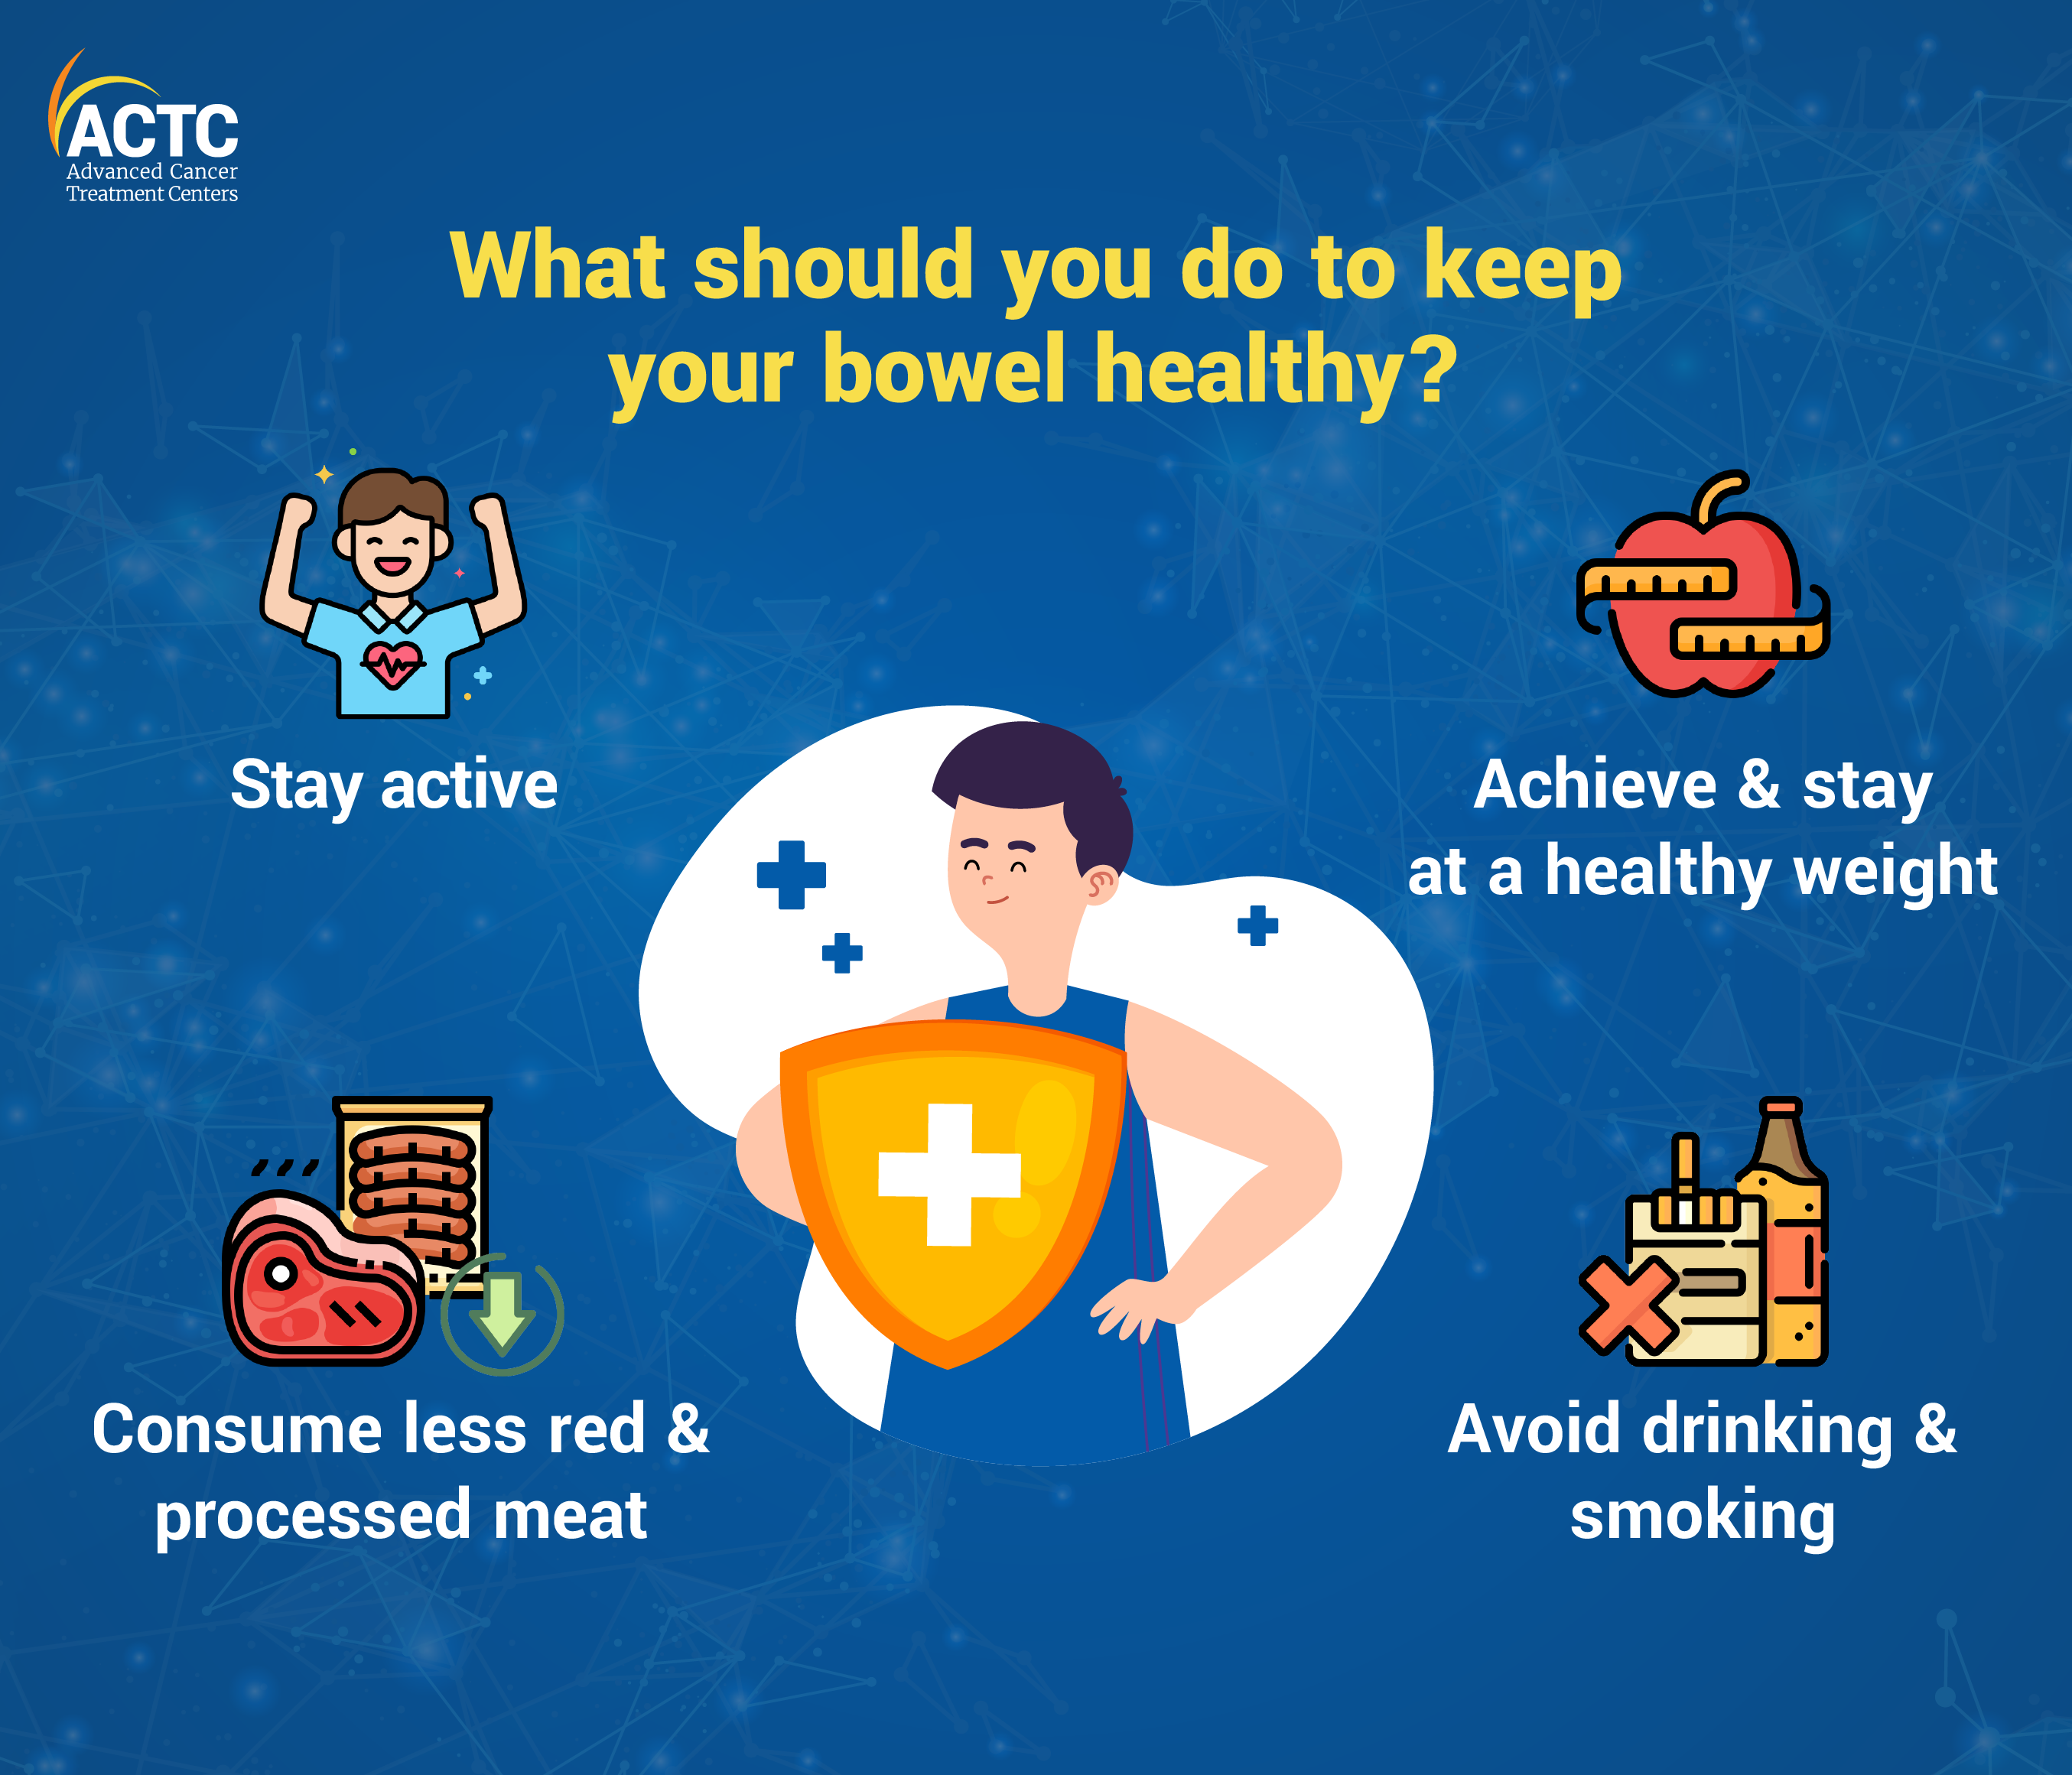 What should you do to keep your bowel healthy